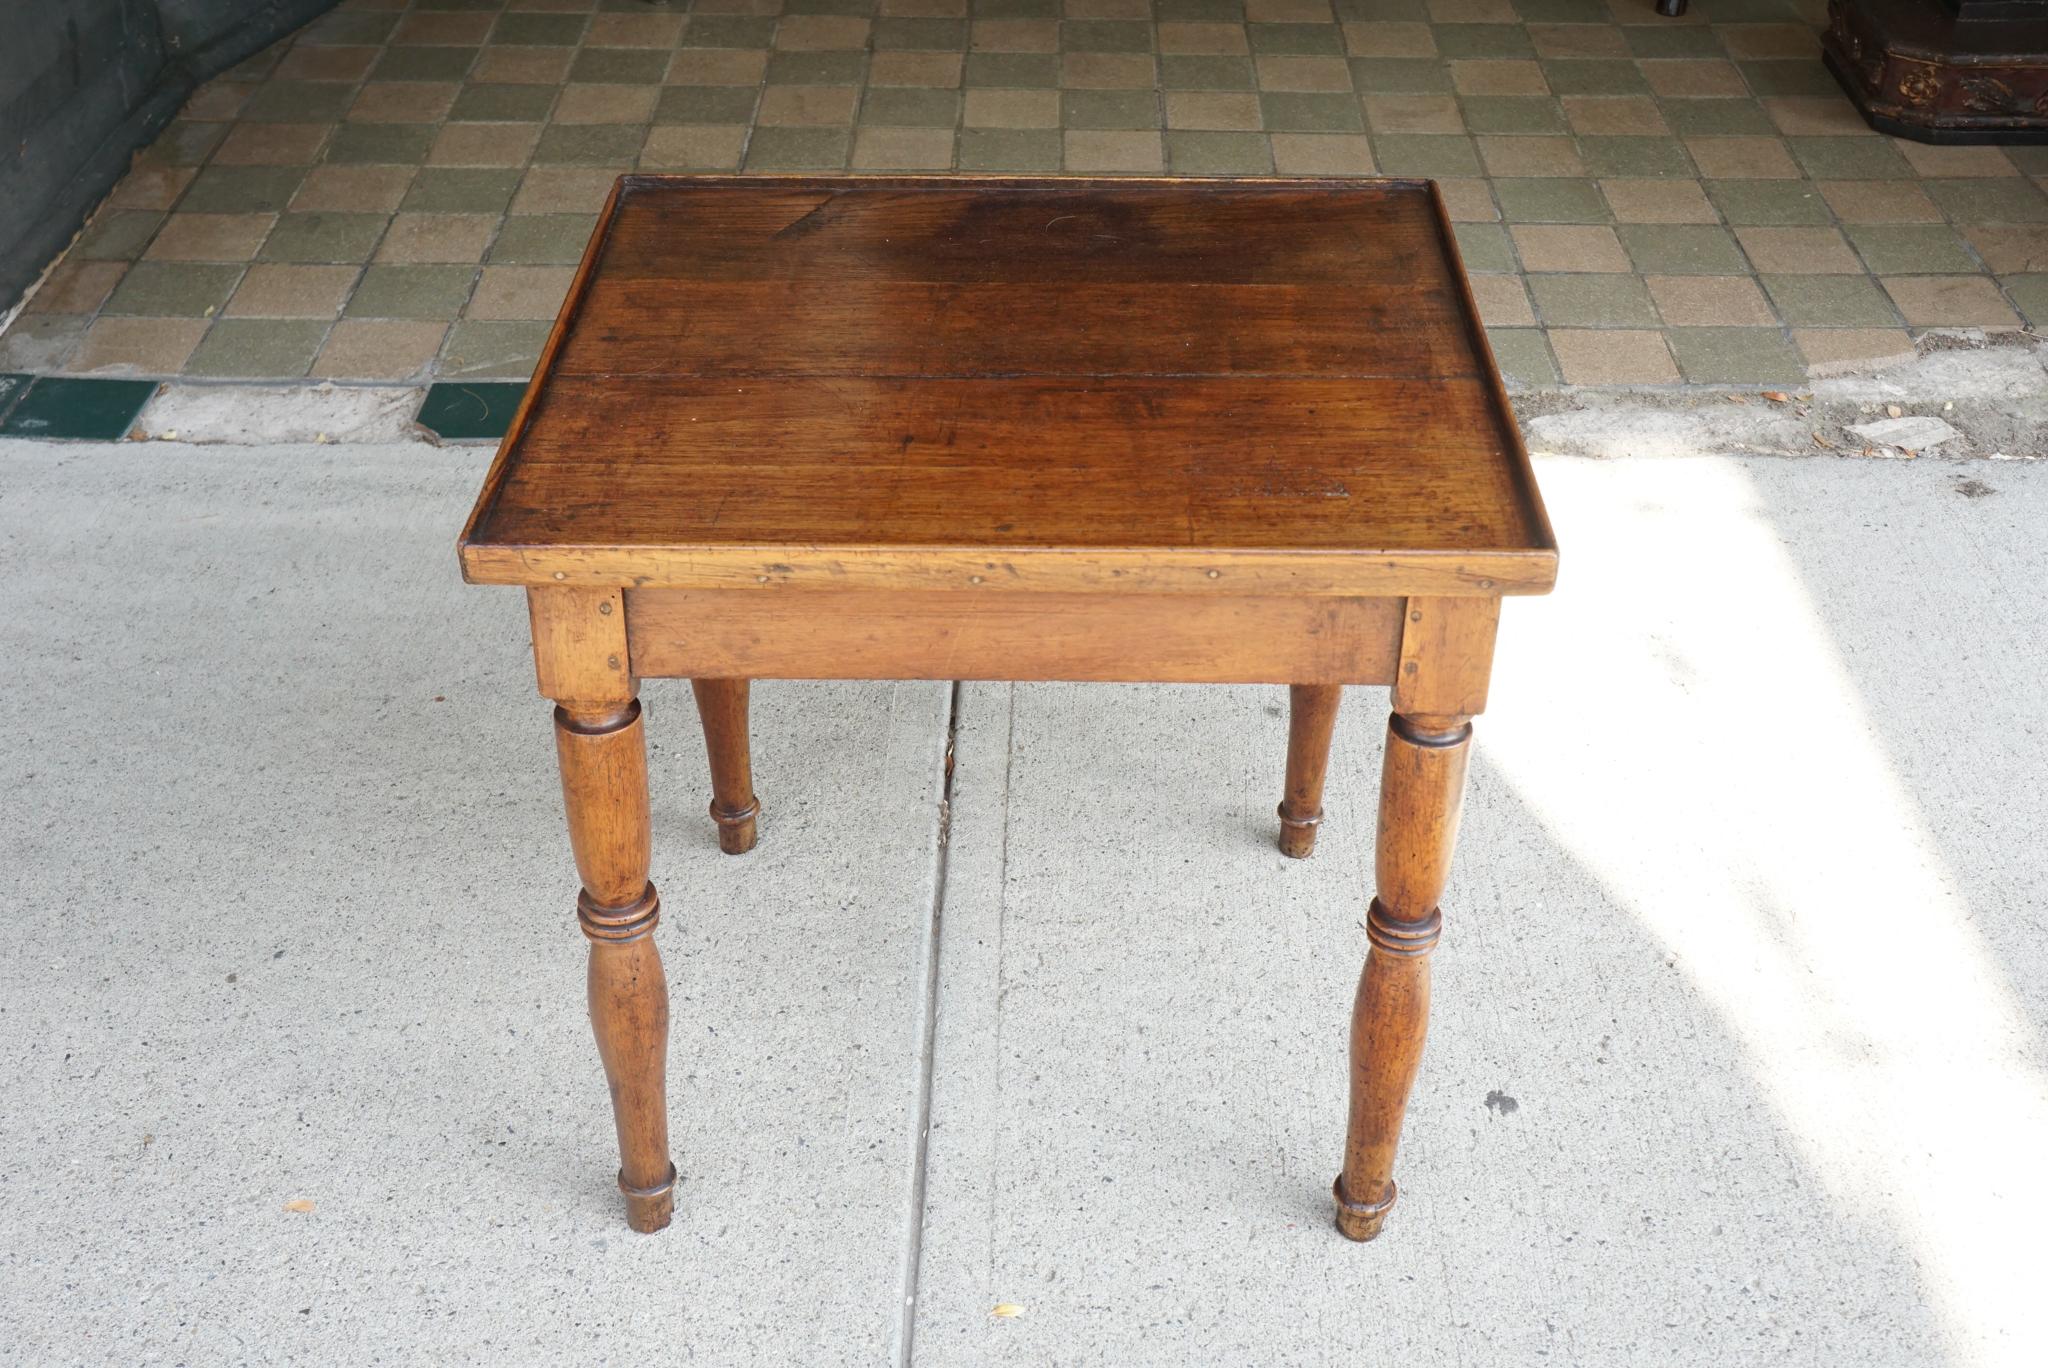 This low small table made in France circa 1800 from walnut and crafted with all peg construction has a nice old surface and well shaped turned legs. Of country manufacture probably it once had a lower tier and short legs under that level. Its